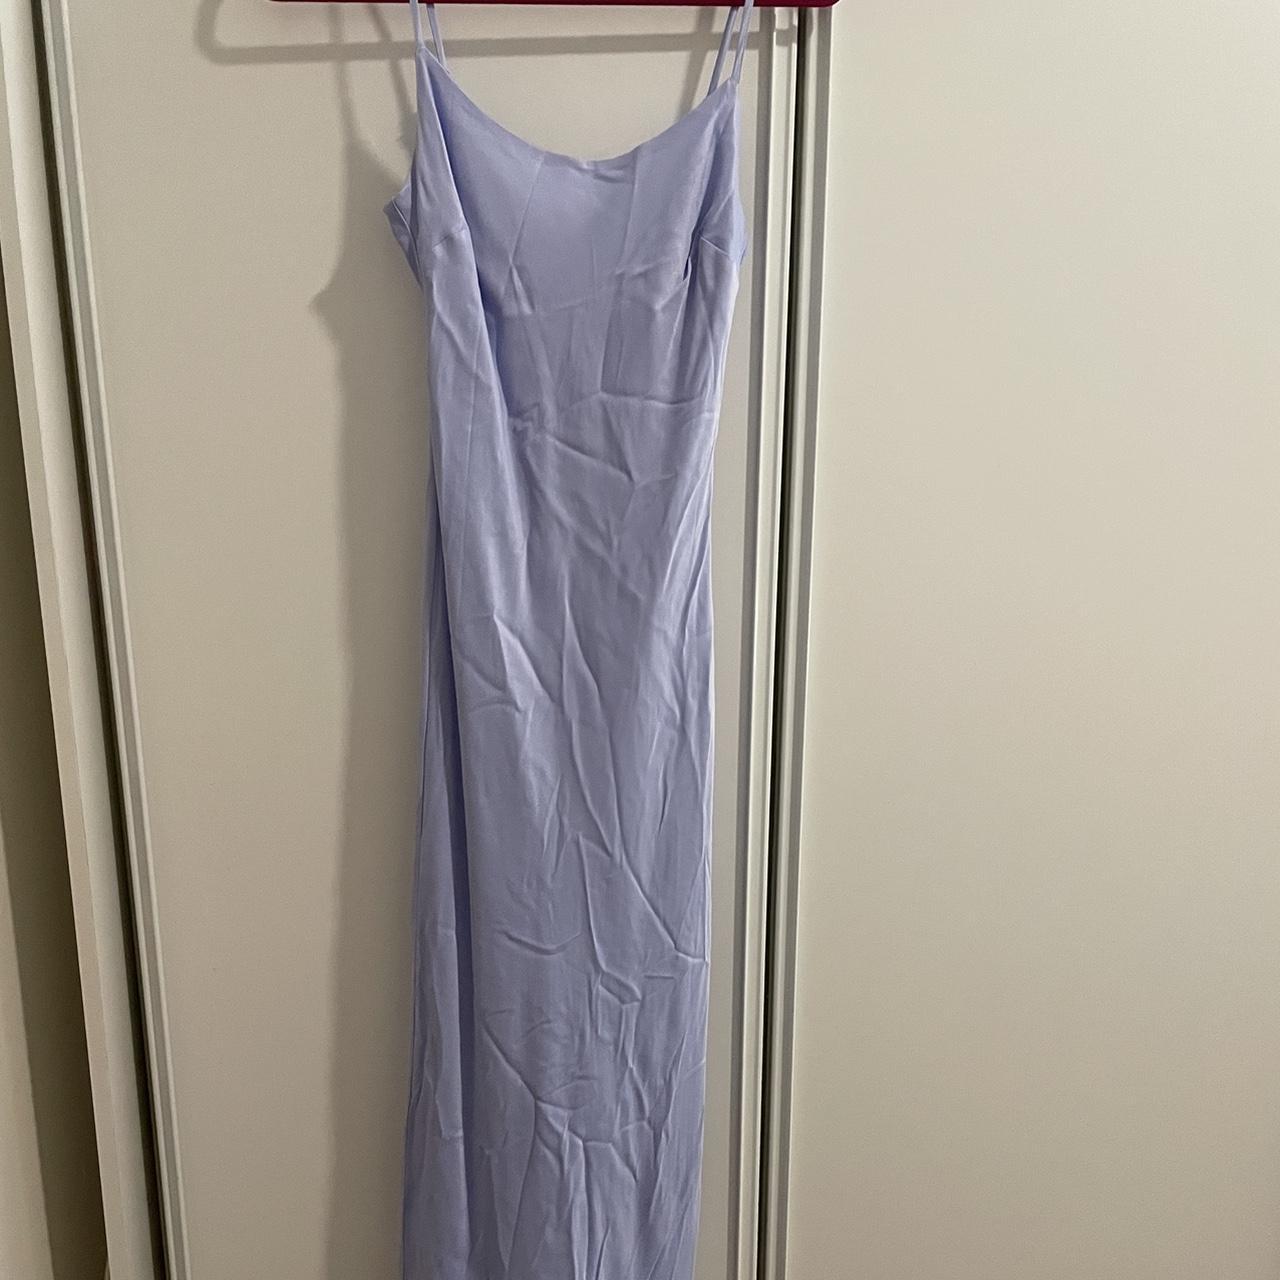 Glassons lilac maxi dress size 6 but fits on me... - Depop